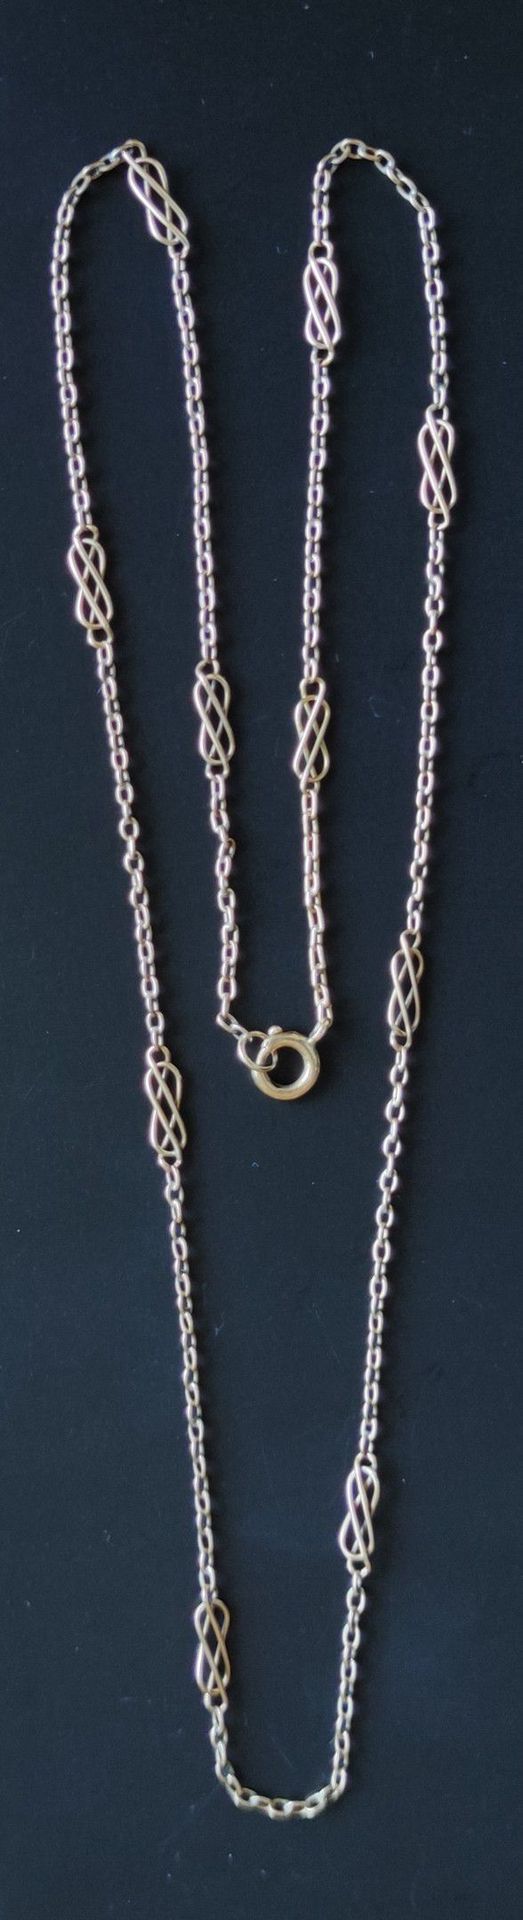 Null CHAIN in yellow gold Weight : 6.6 grams

	a charge of control